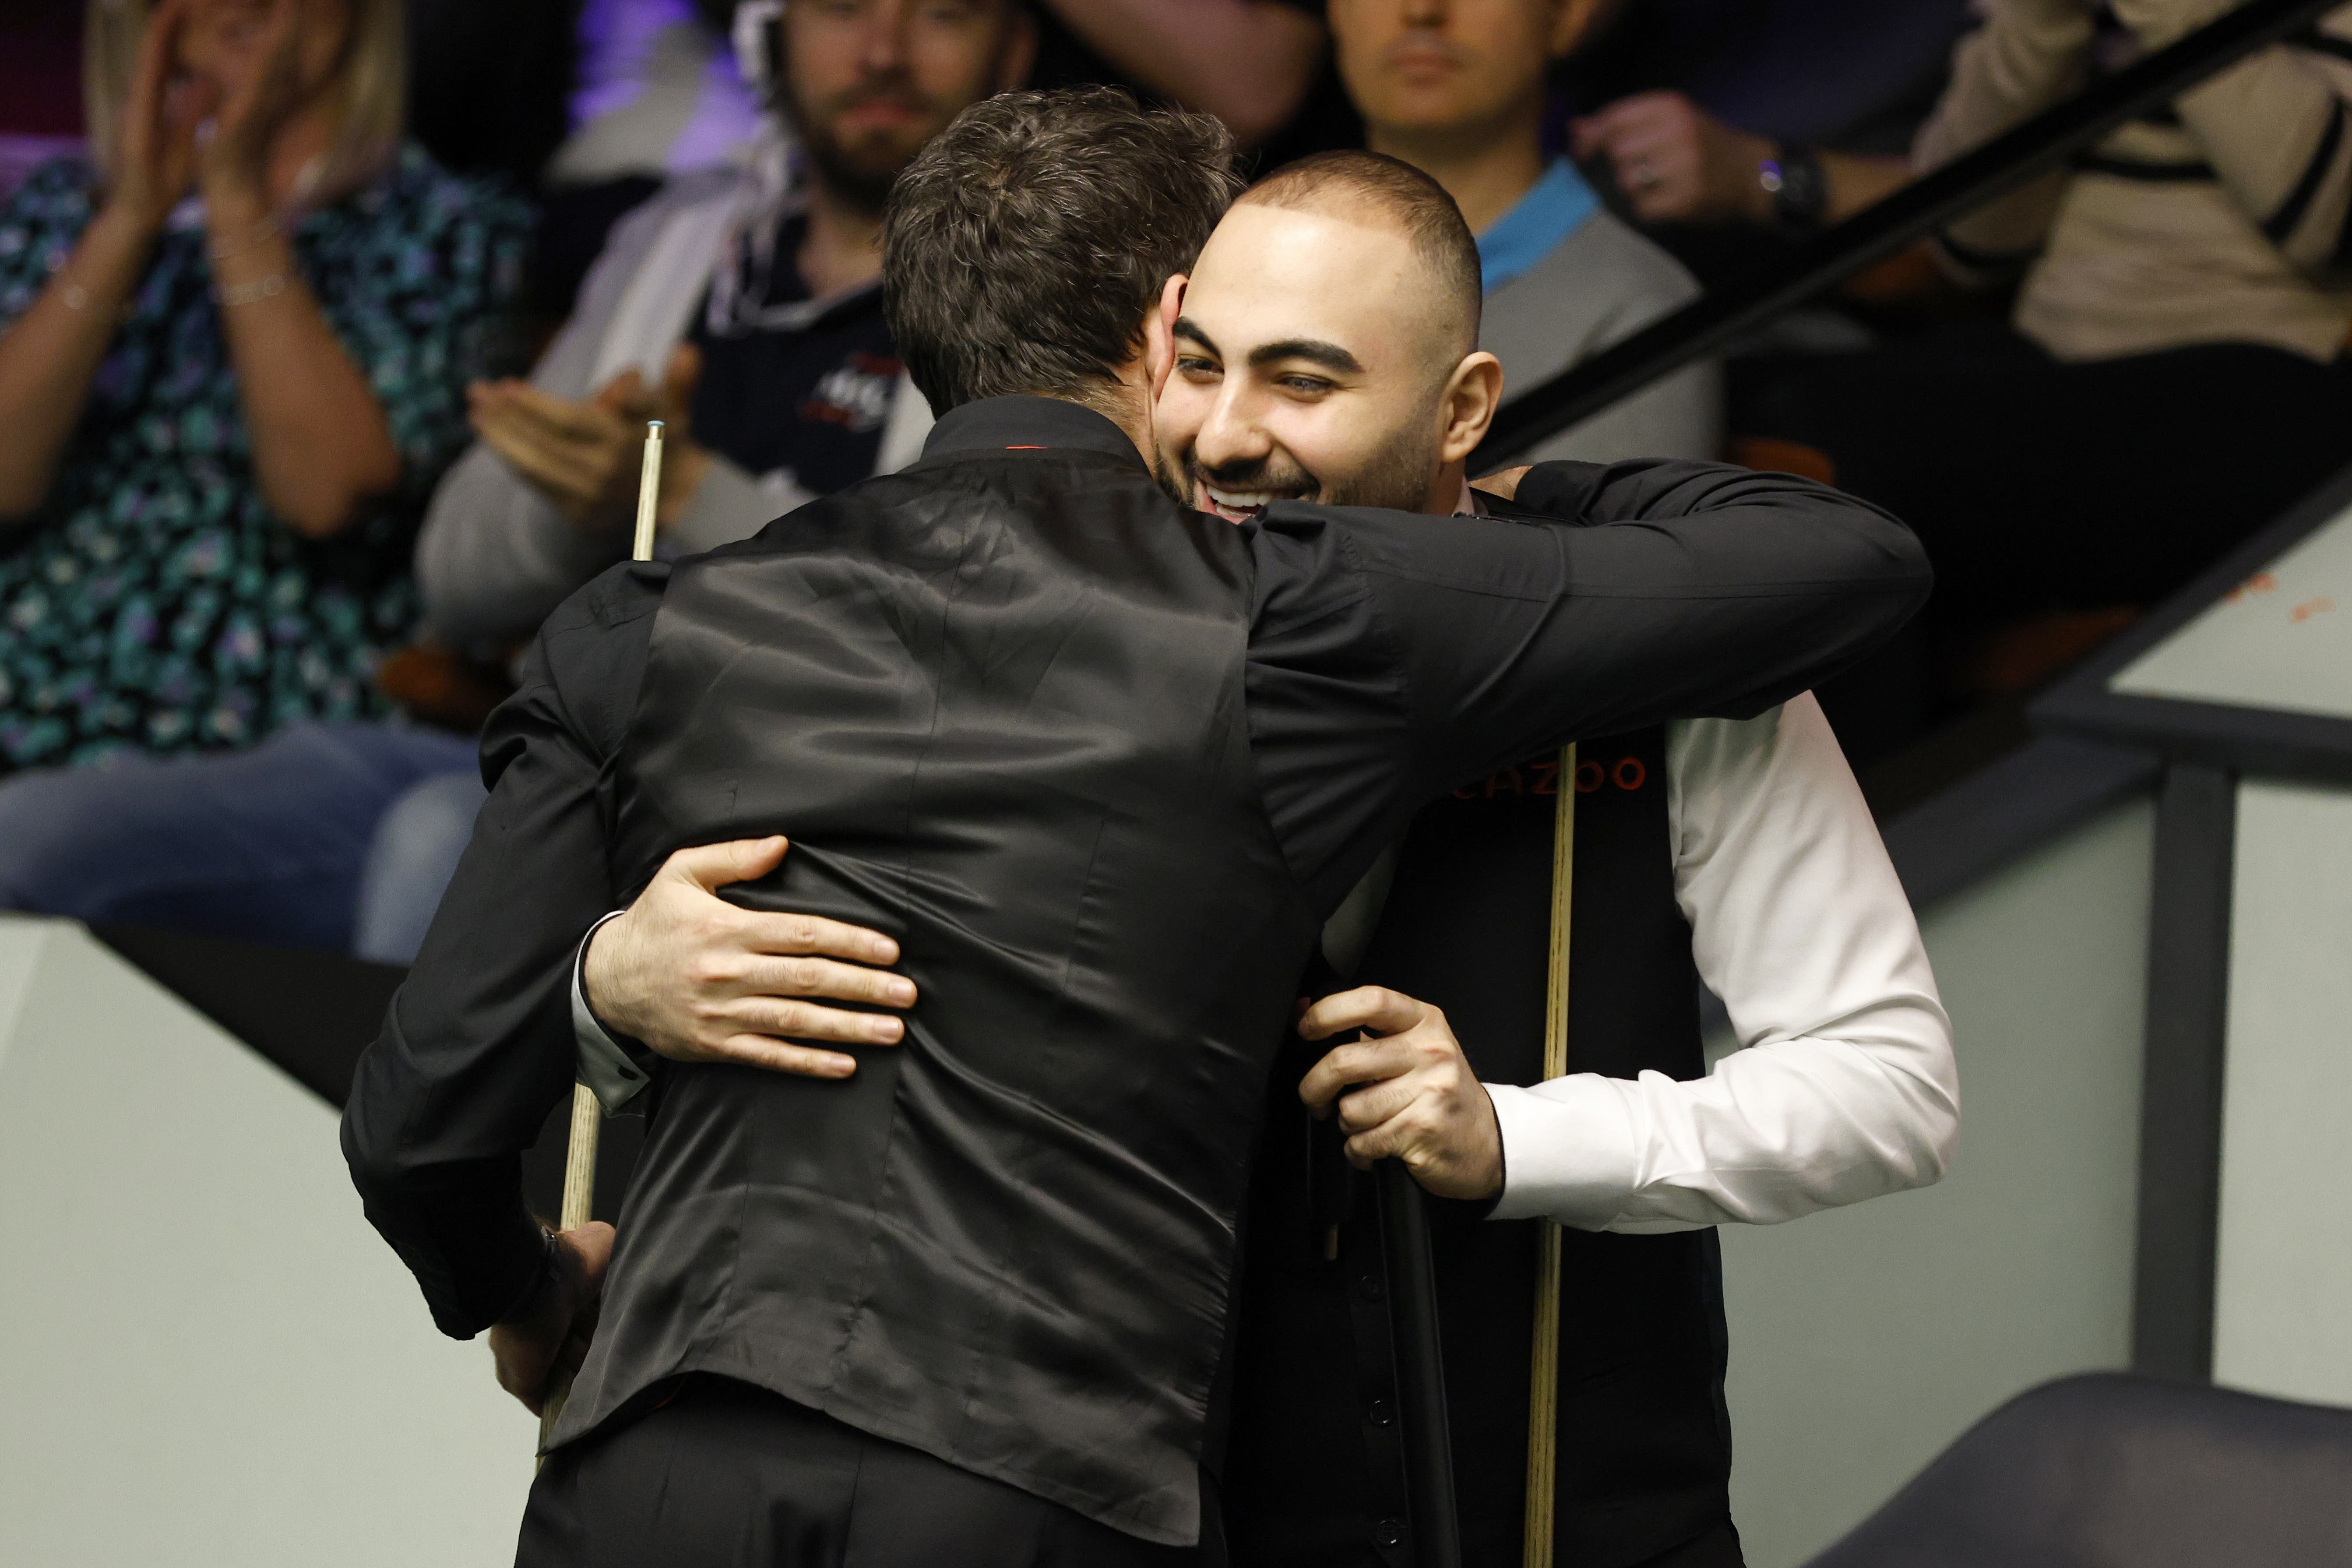 Ronnie O’Sullivan and Hossein vafaei hugged at the end of their second-round contest